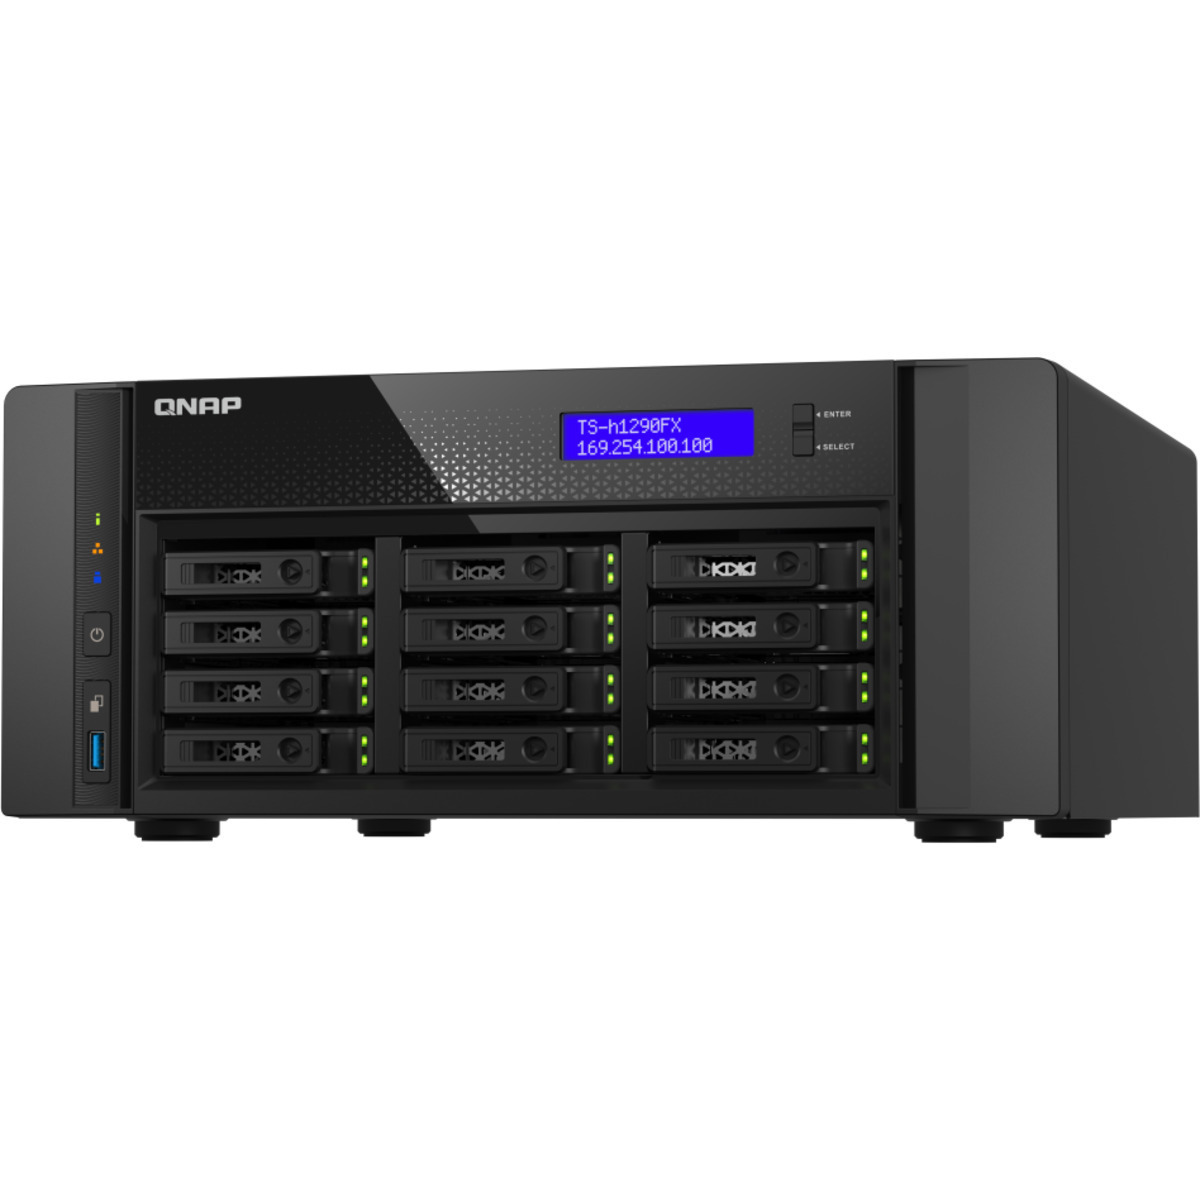 buy QNAP TS-h1290FX QuTS 7232P hero Edition Desktop NAS - Network Attached Storage Device Burn-In Tested Configurations - nas headquarters buy network attached storage server device das new raid-5 free shipping usa TS-h1290FX QuTS 7232P hero Edition